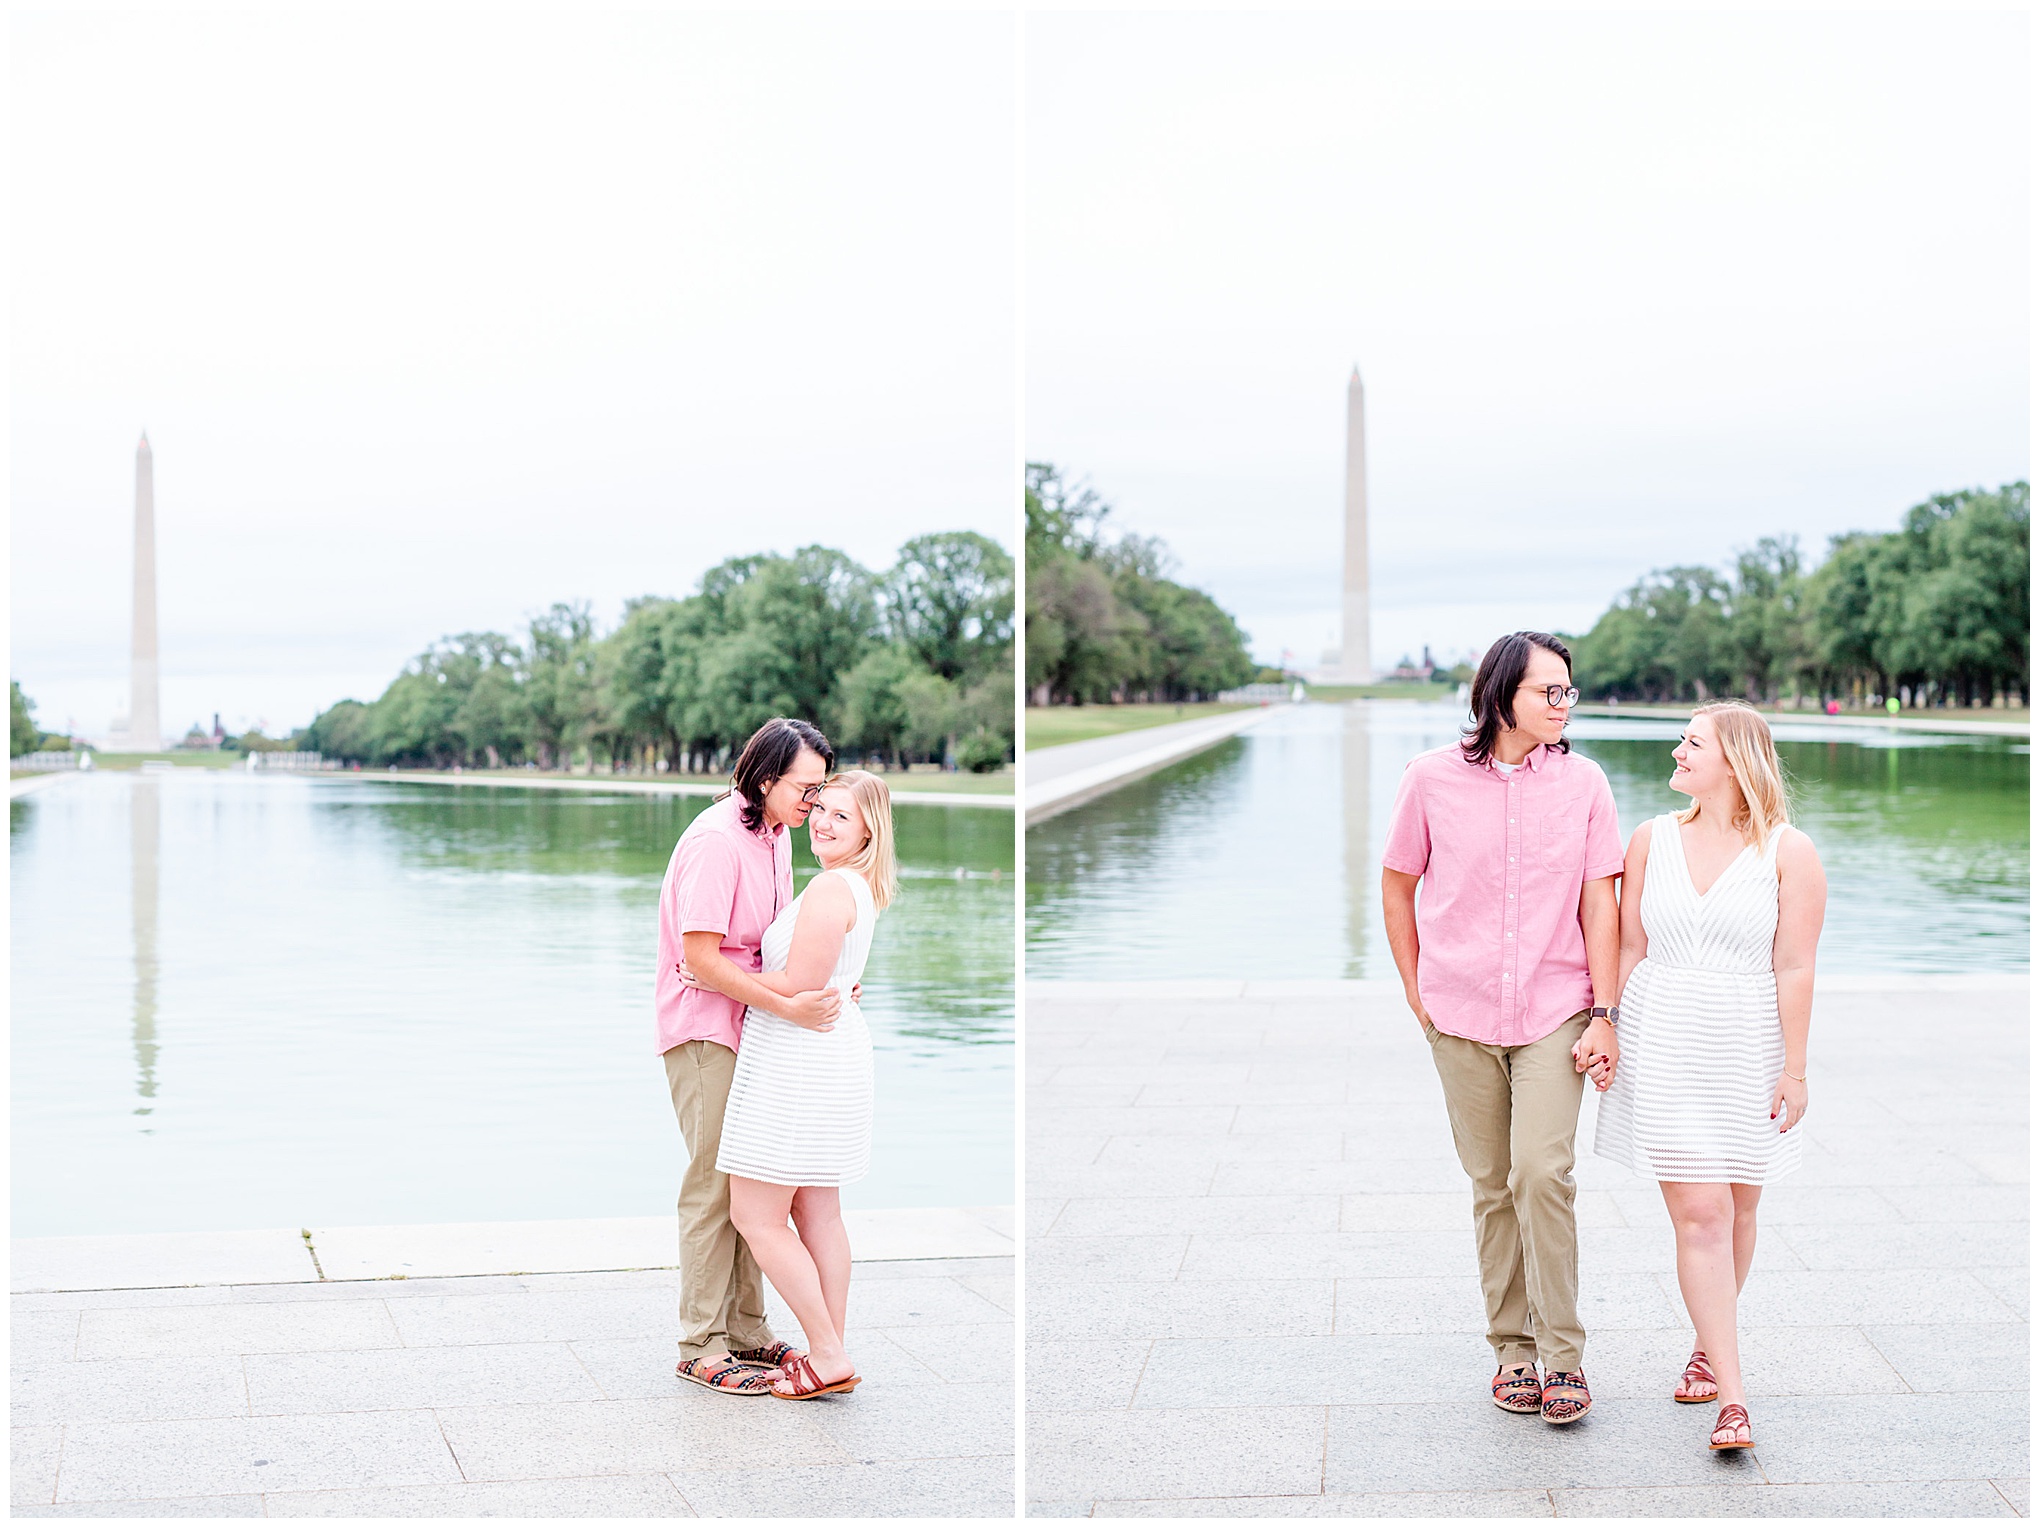 Lincoln Memorial suprise proposal, National Mall proposal, reflecting pool, Lincoln Memorial portraits, National Mall portraits, engagement photos, proposal portraits, surprise proposal photos, Rachel E.H. Photography, D.C. portraits, Virginia wedding photographer, Maryland wedding photographer, Baltimore wedding photographer, D.C. wedding photographer, couple walking together